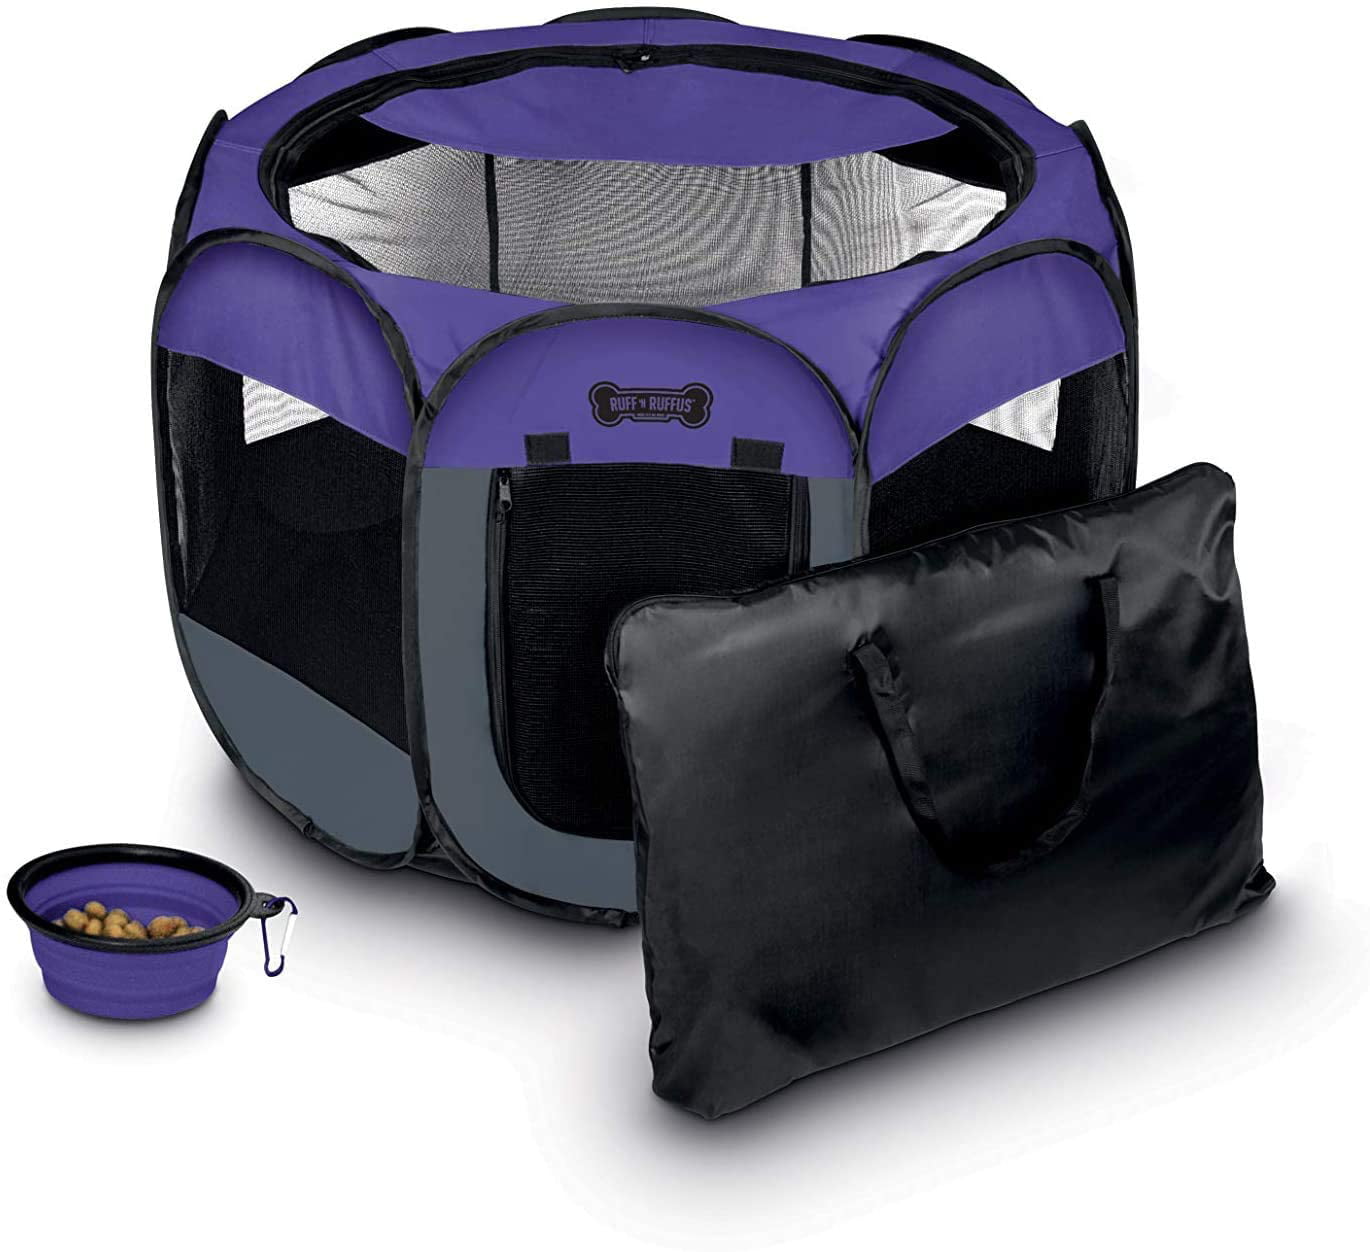 Ruff 'n Ruffus Portable Foldable Pet Playpen + Free Carry Case and Bowl | Indoor/Outdoor Water-Resistant Shade Cover